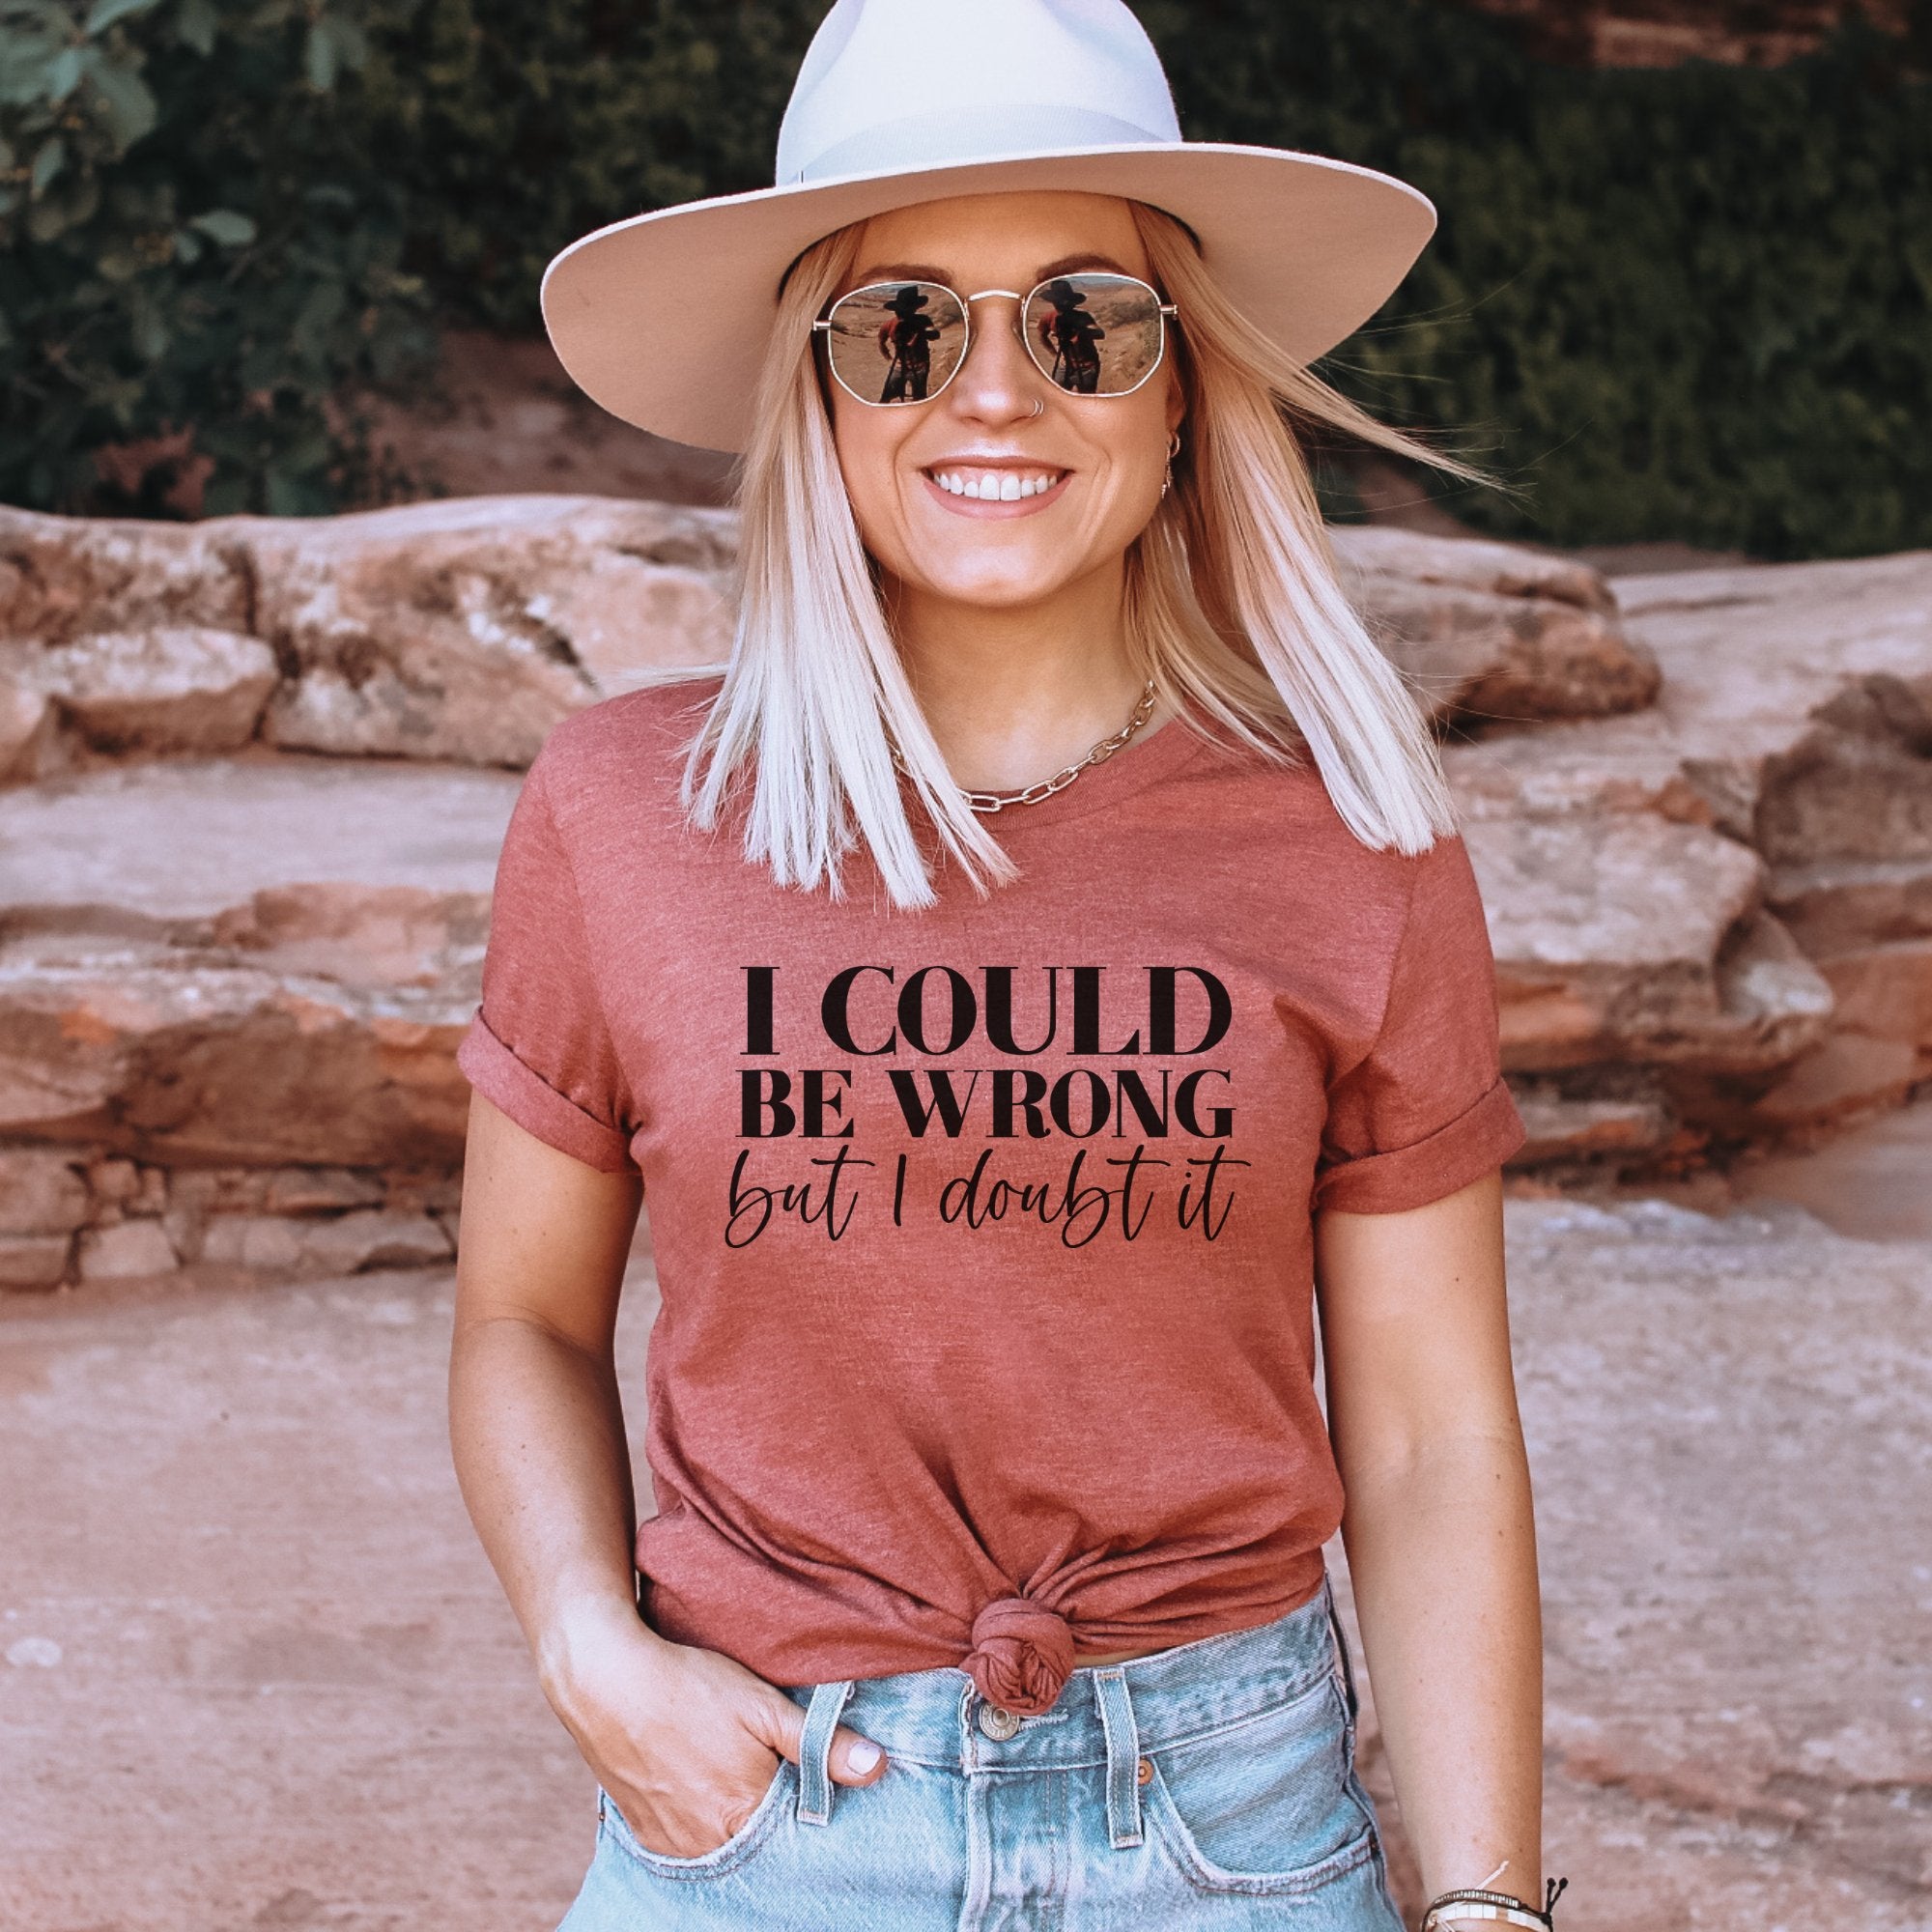 I Could Be Wrong But I Doubt It T-Shirt - Trendznmore